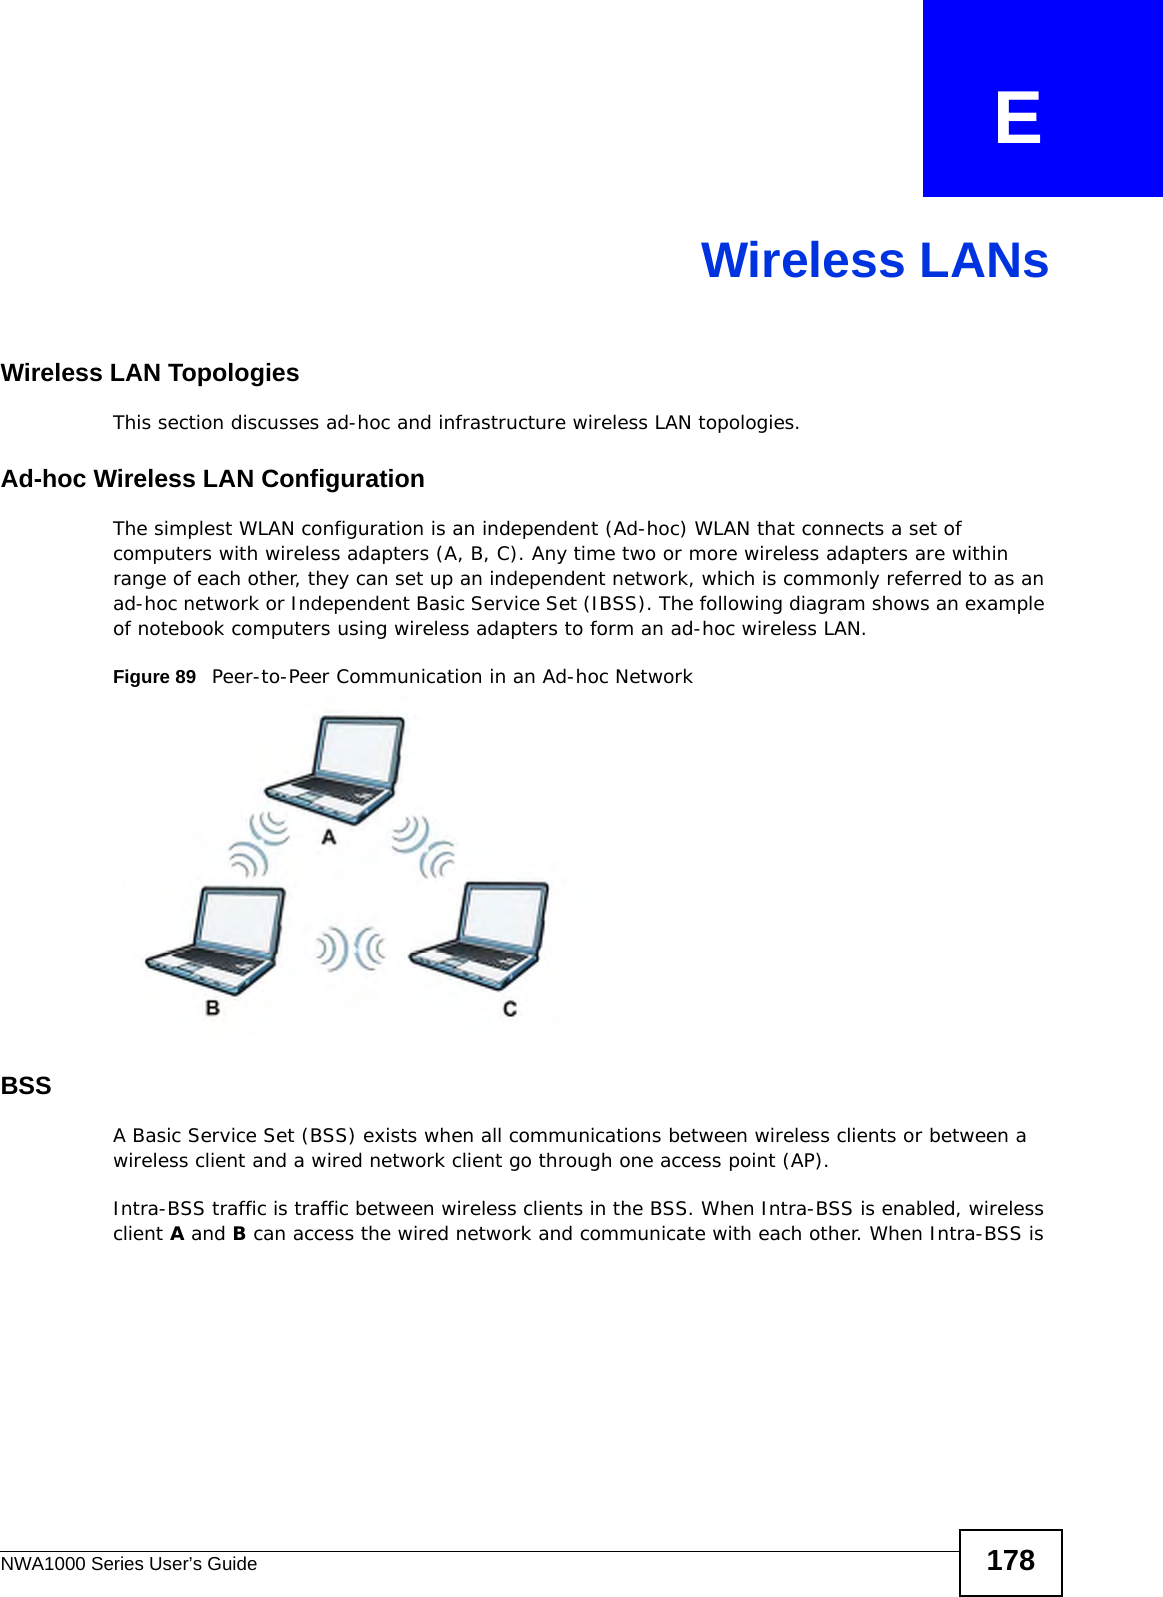 NWA1000 Series User’s Guide 178APPENDIX   EWireless LANsWireless LAN TopologiesThis section discusses ad-hoc and infrastructure wireless LAN topologies.Ad-hoc Wireless LAN ConfigurationThe simplest WLAN configuration is an independent (Ad-hoc) WLAN that connects a set of computers with wireless adapters (A, B, C). Any time two or more wireless adapters are within range of each other, they can set up an independent network, which is commonly referred to as an ad-hoc network or Independent Basic Service Set (IBSS). The following diagram shows an example of notebook computers using wireless adapters to form an ad-hoc wireless LAN. Figure 89   Peer-to-Peer Communication in an Ad-hoc NetworkBSSA Basic Service Set (BSS) exists when all communications between wireless clients or between a wireless client and a wired network client go through one access point (AP). Intra-BSS traffic is traffic between wireless clients in the BSS. When Intra-BSS is enabled, wireless client A and B can access the wired network and communicate with each other. When Intra-BSS is 